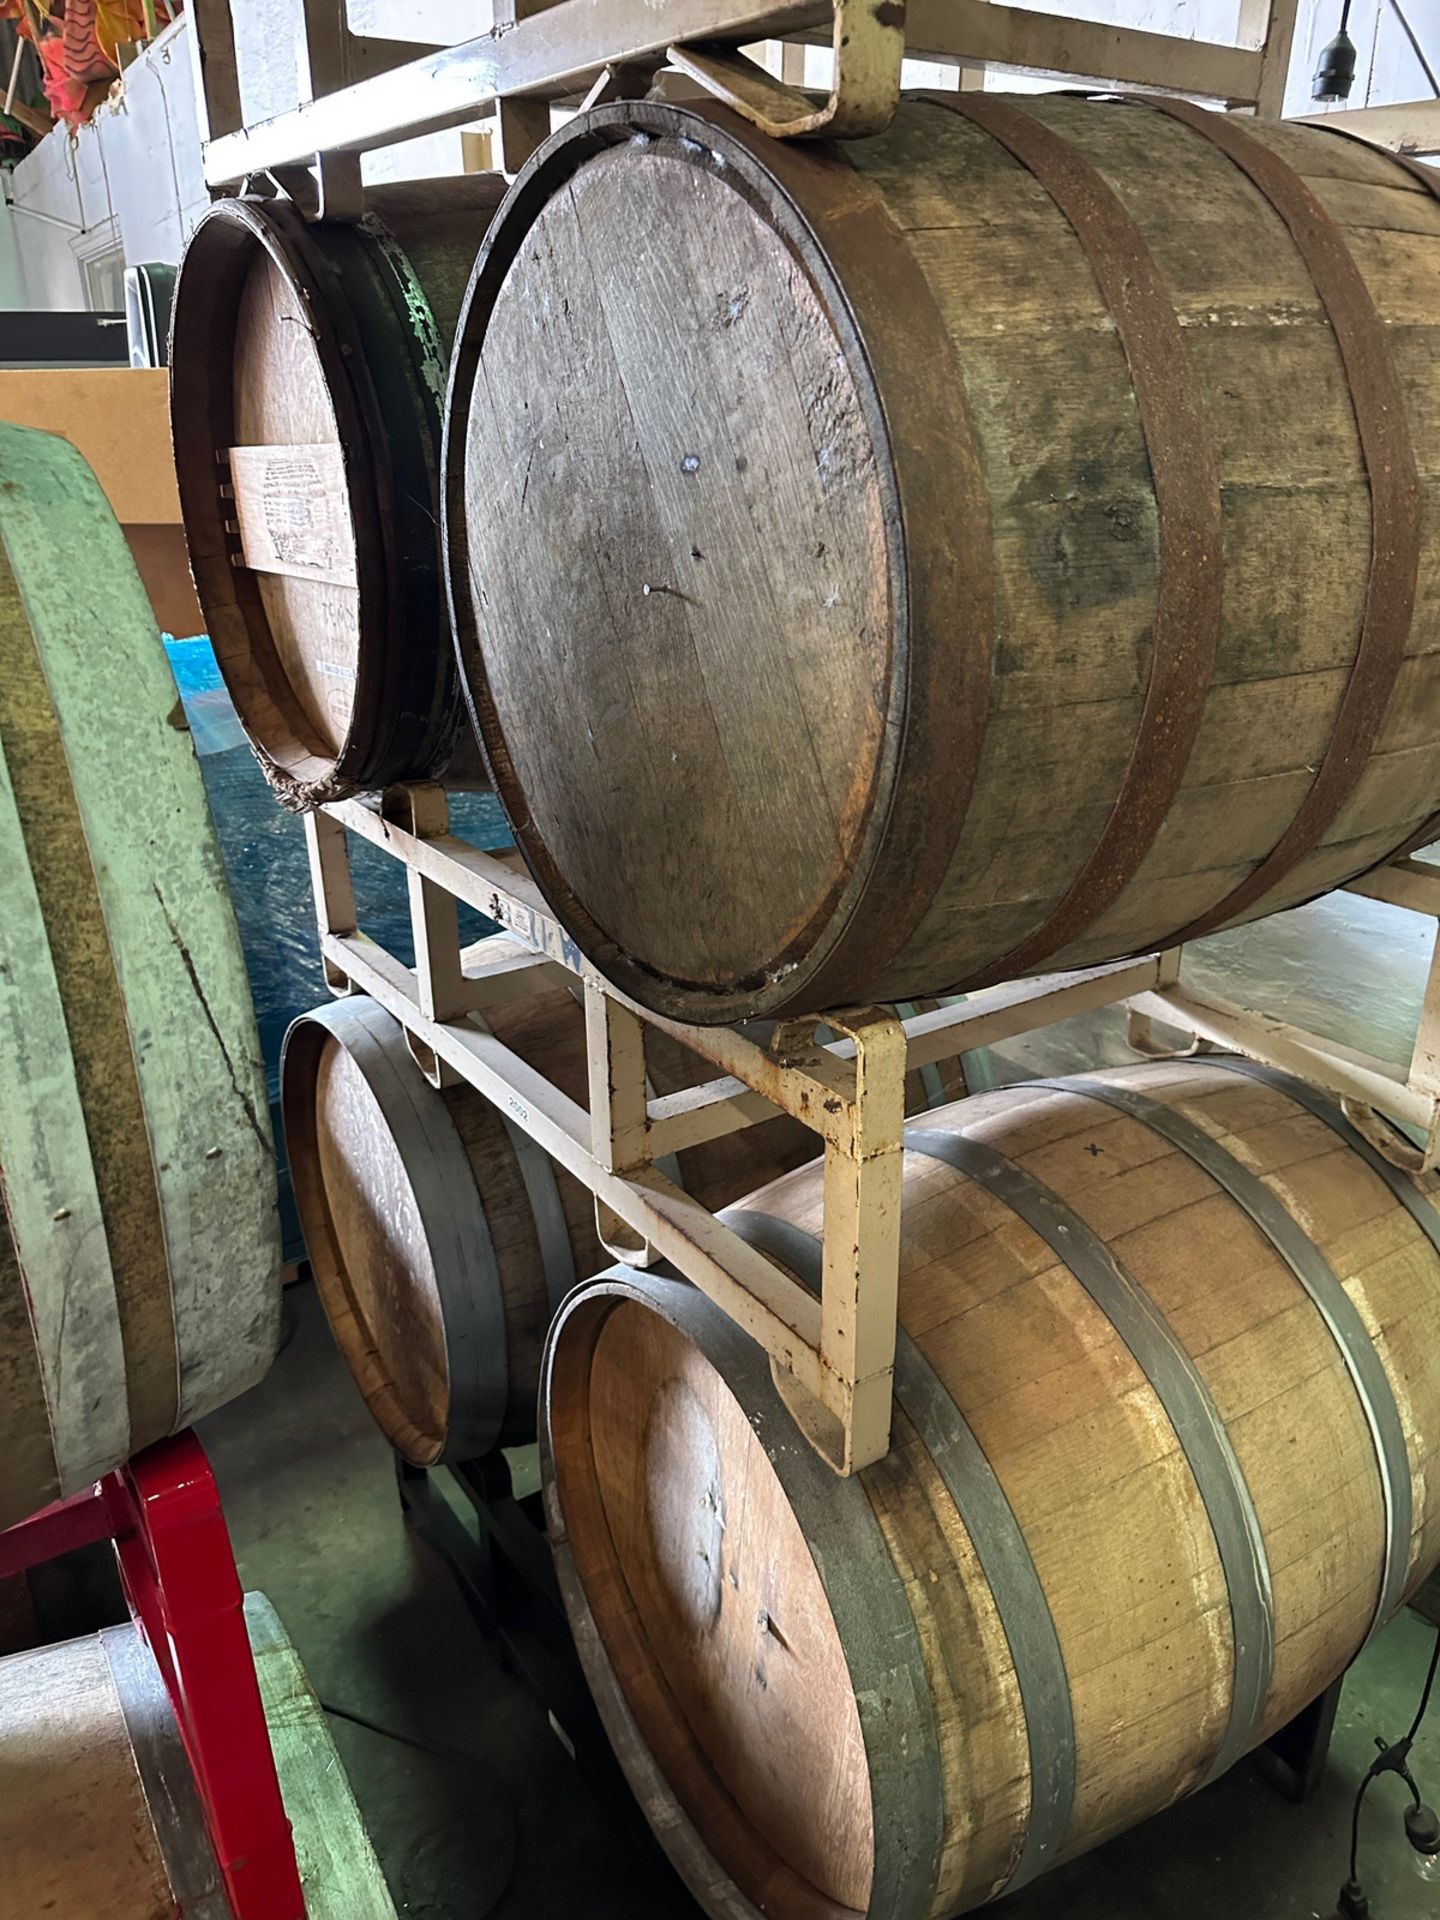 Lot of (4) Wooden Barrels (Used for Sours) | Rig Fee $50